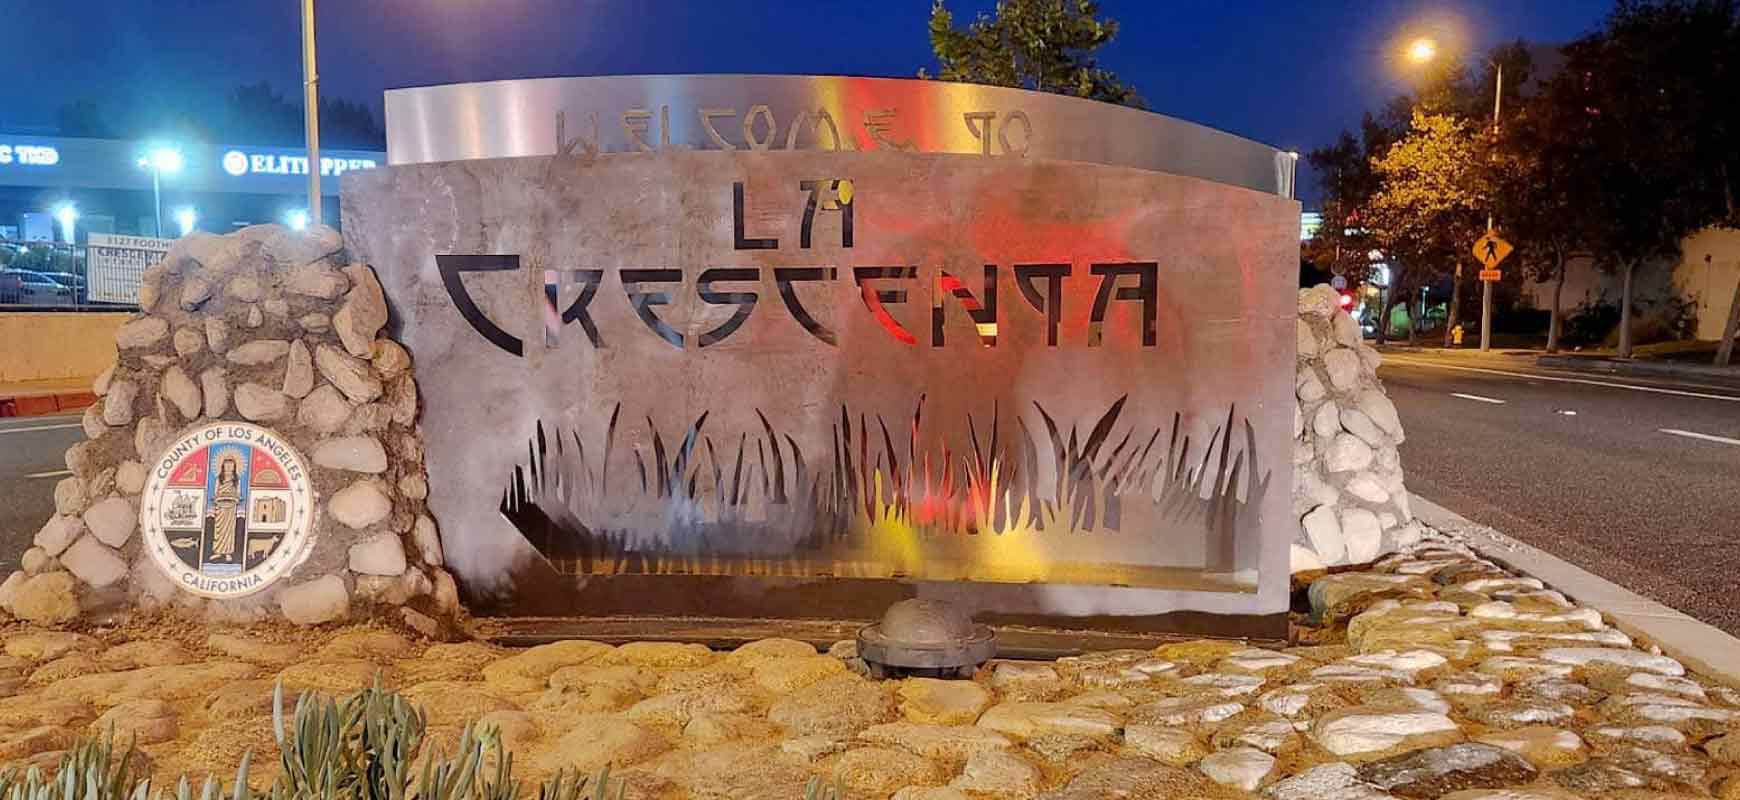 La Crescenta neighborhood entrance sign with a welcoming text made of aluminum for landmarking